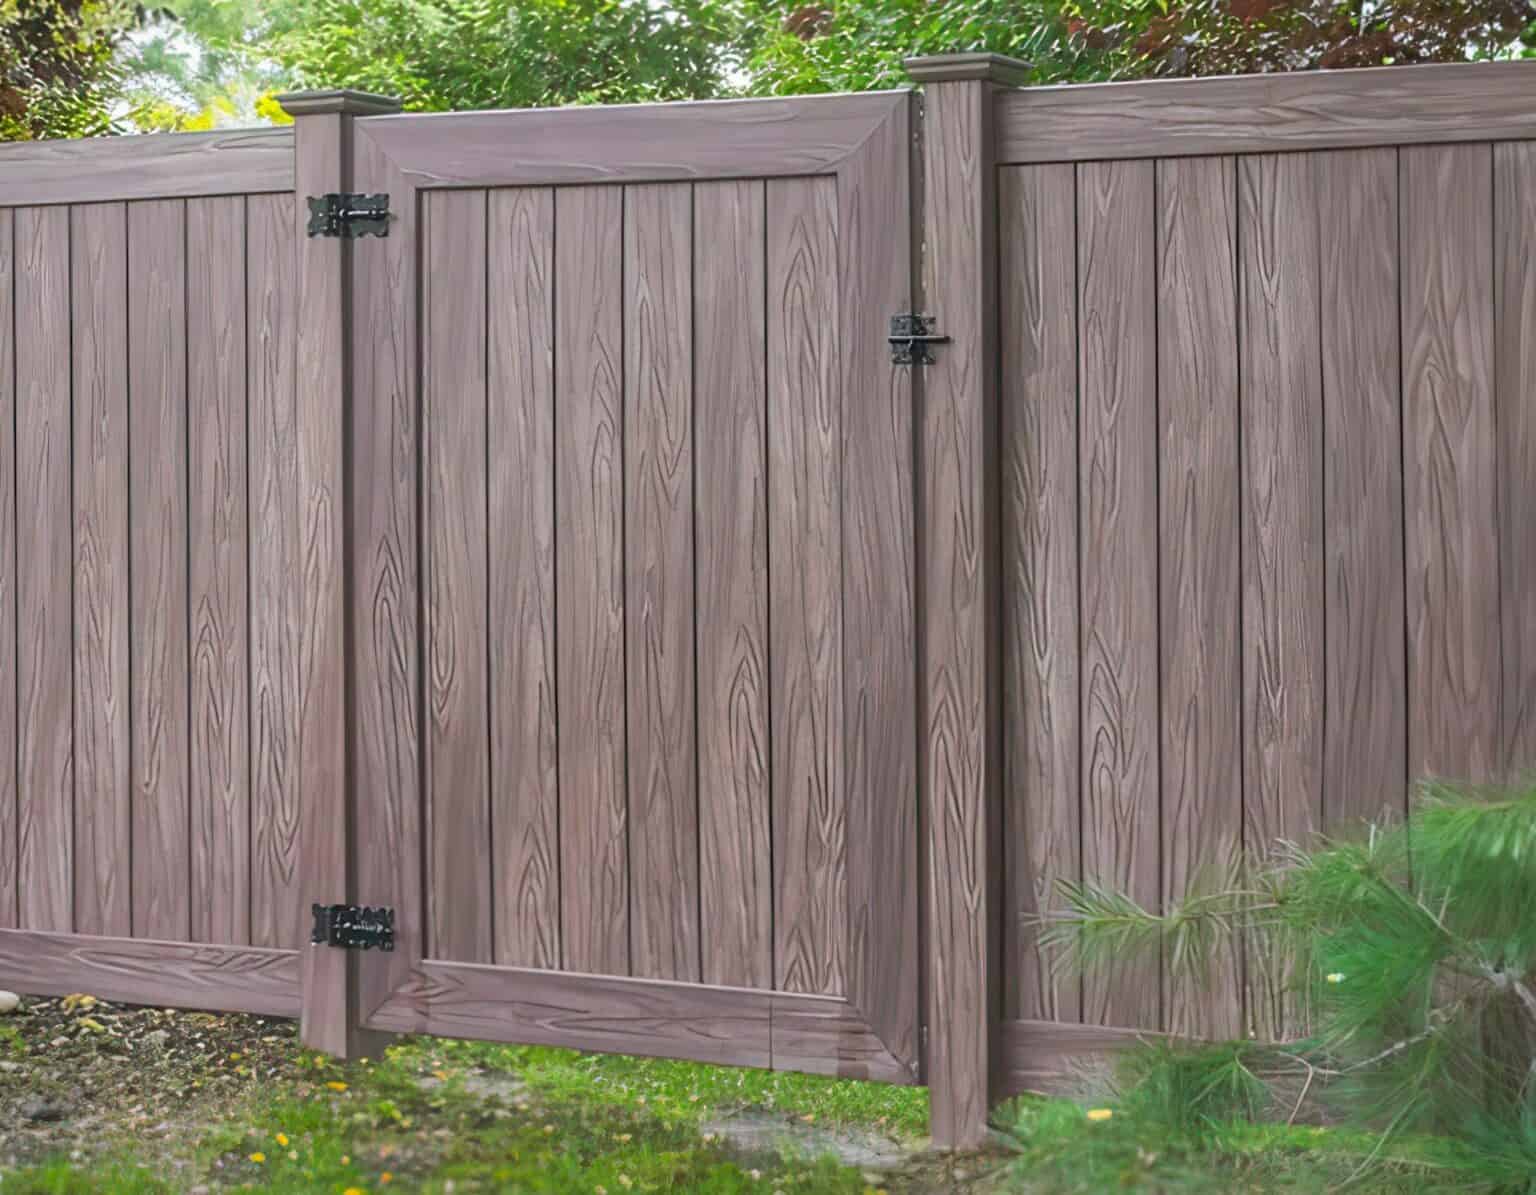 Vinyl single side gate with realistic wooden patterns and earthy tones, separating the backyard from the lush forest.